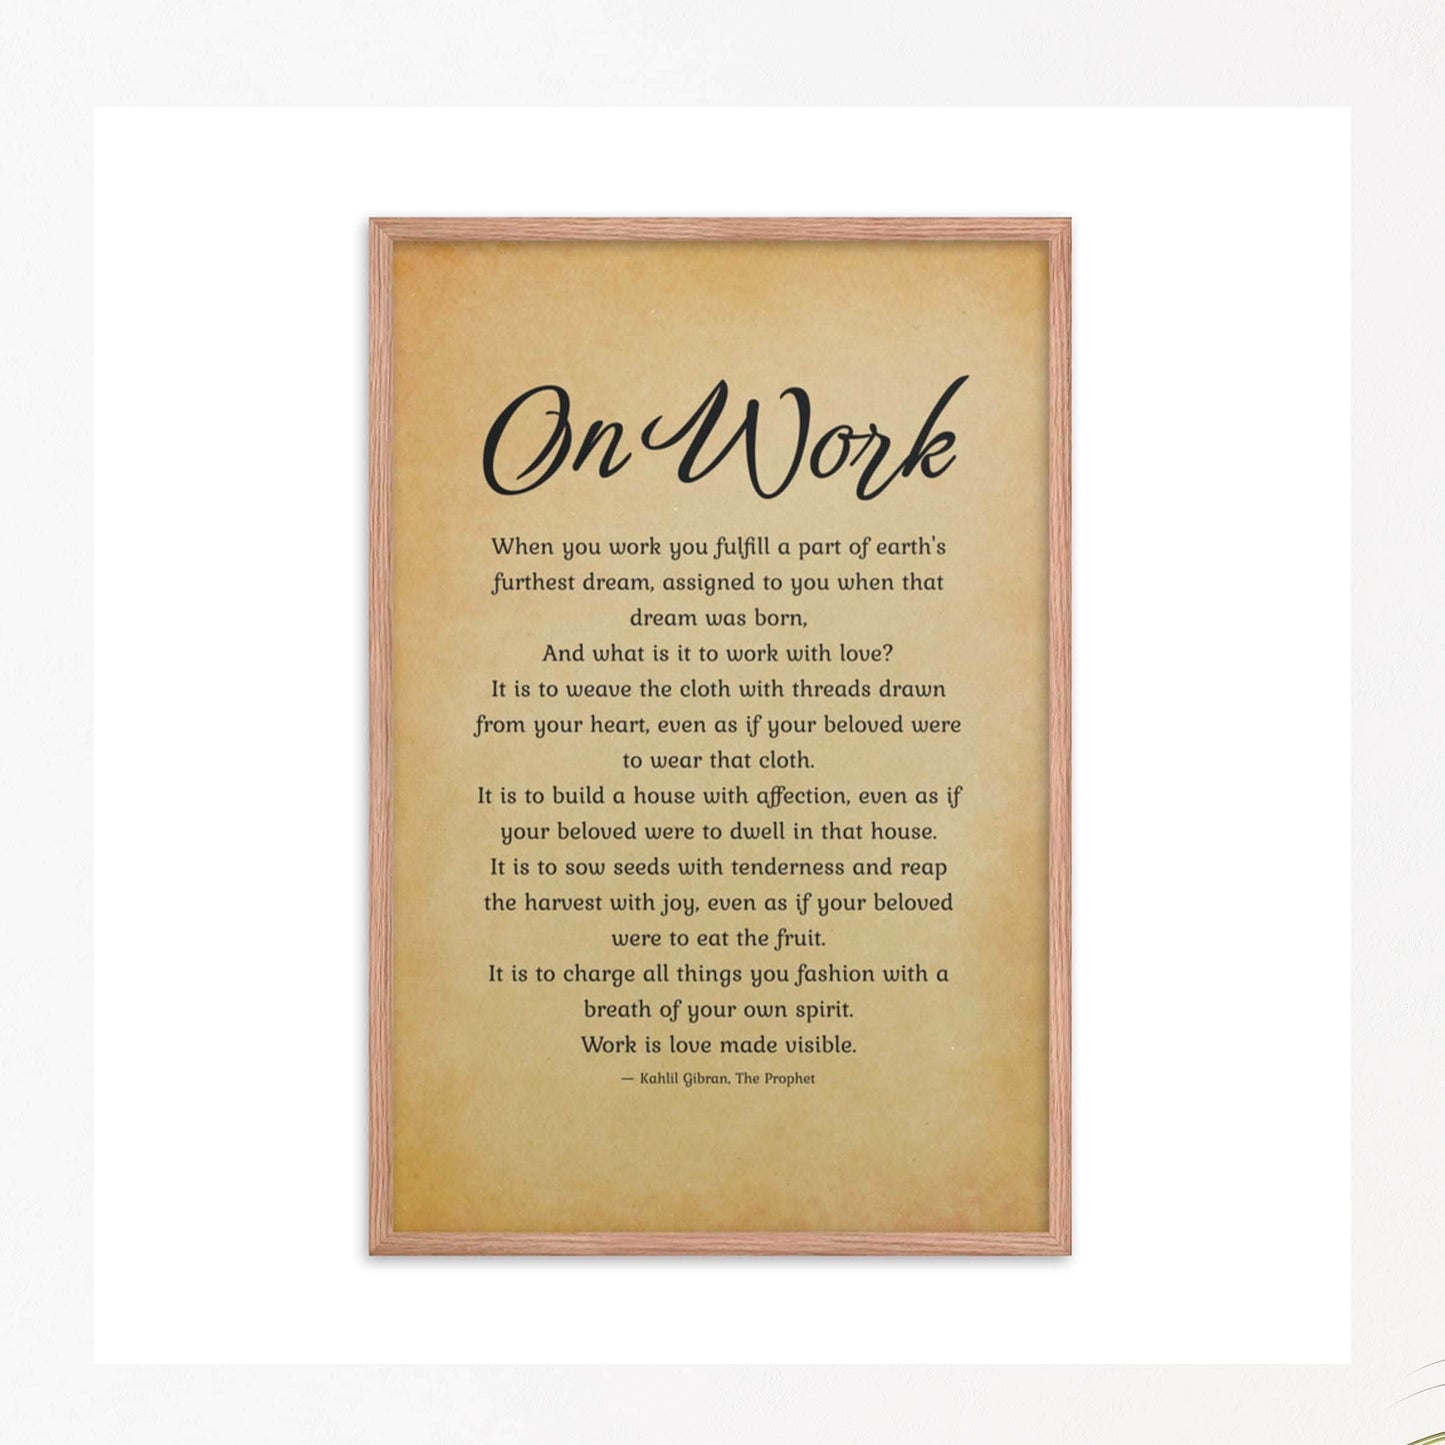 On Work By Kahlil Gibran Print, Motivational Posters, HomeOffice & Study Decor